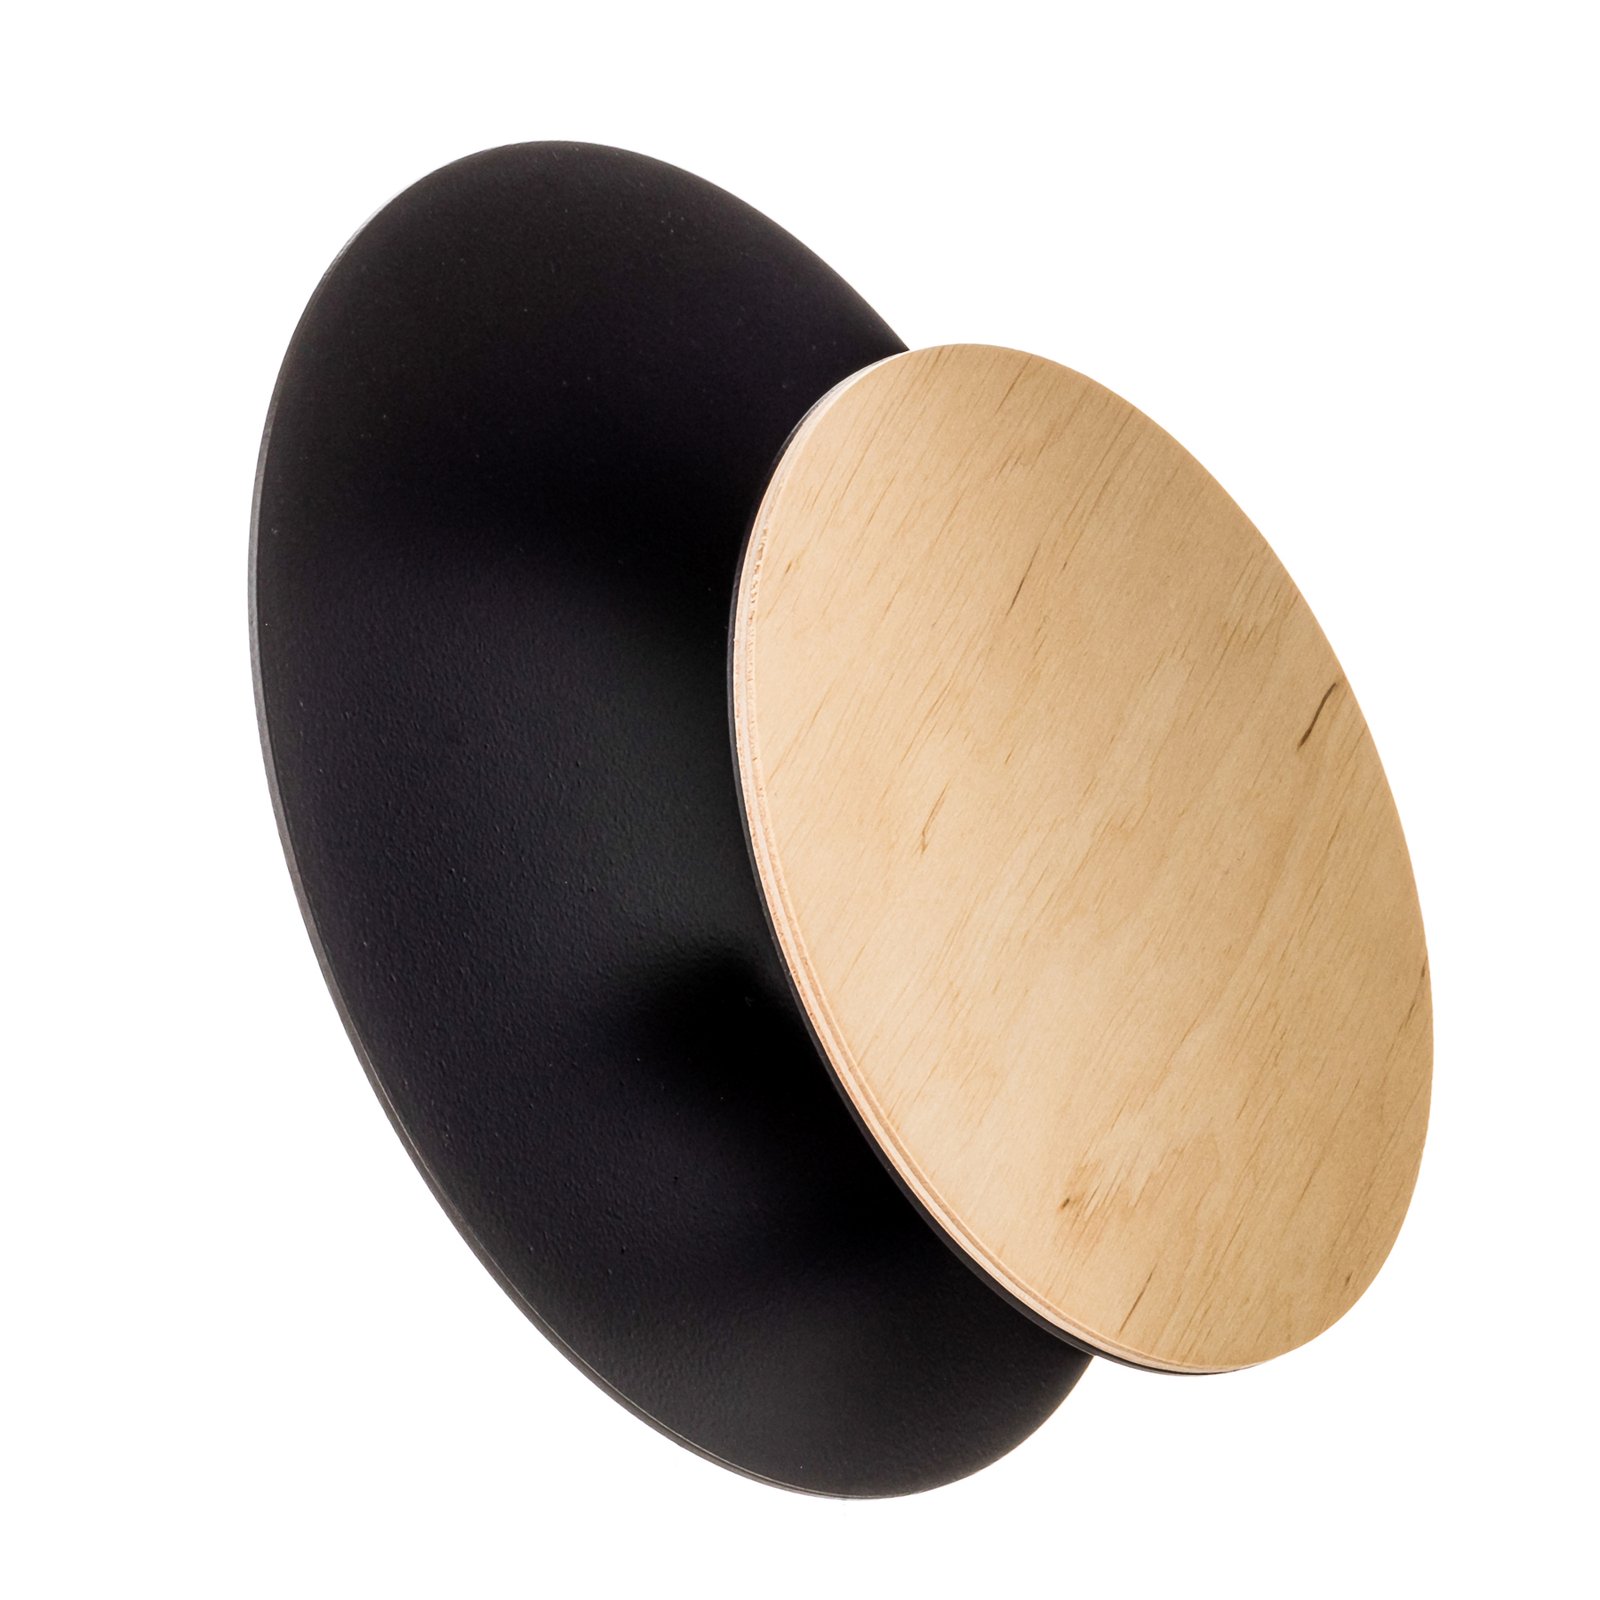 Circle wall lamp in black, wooden decorative panel